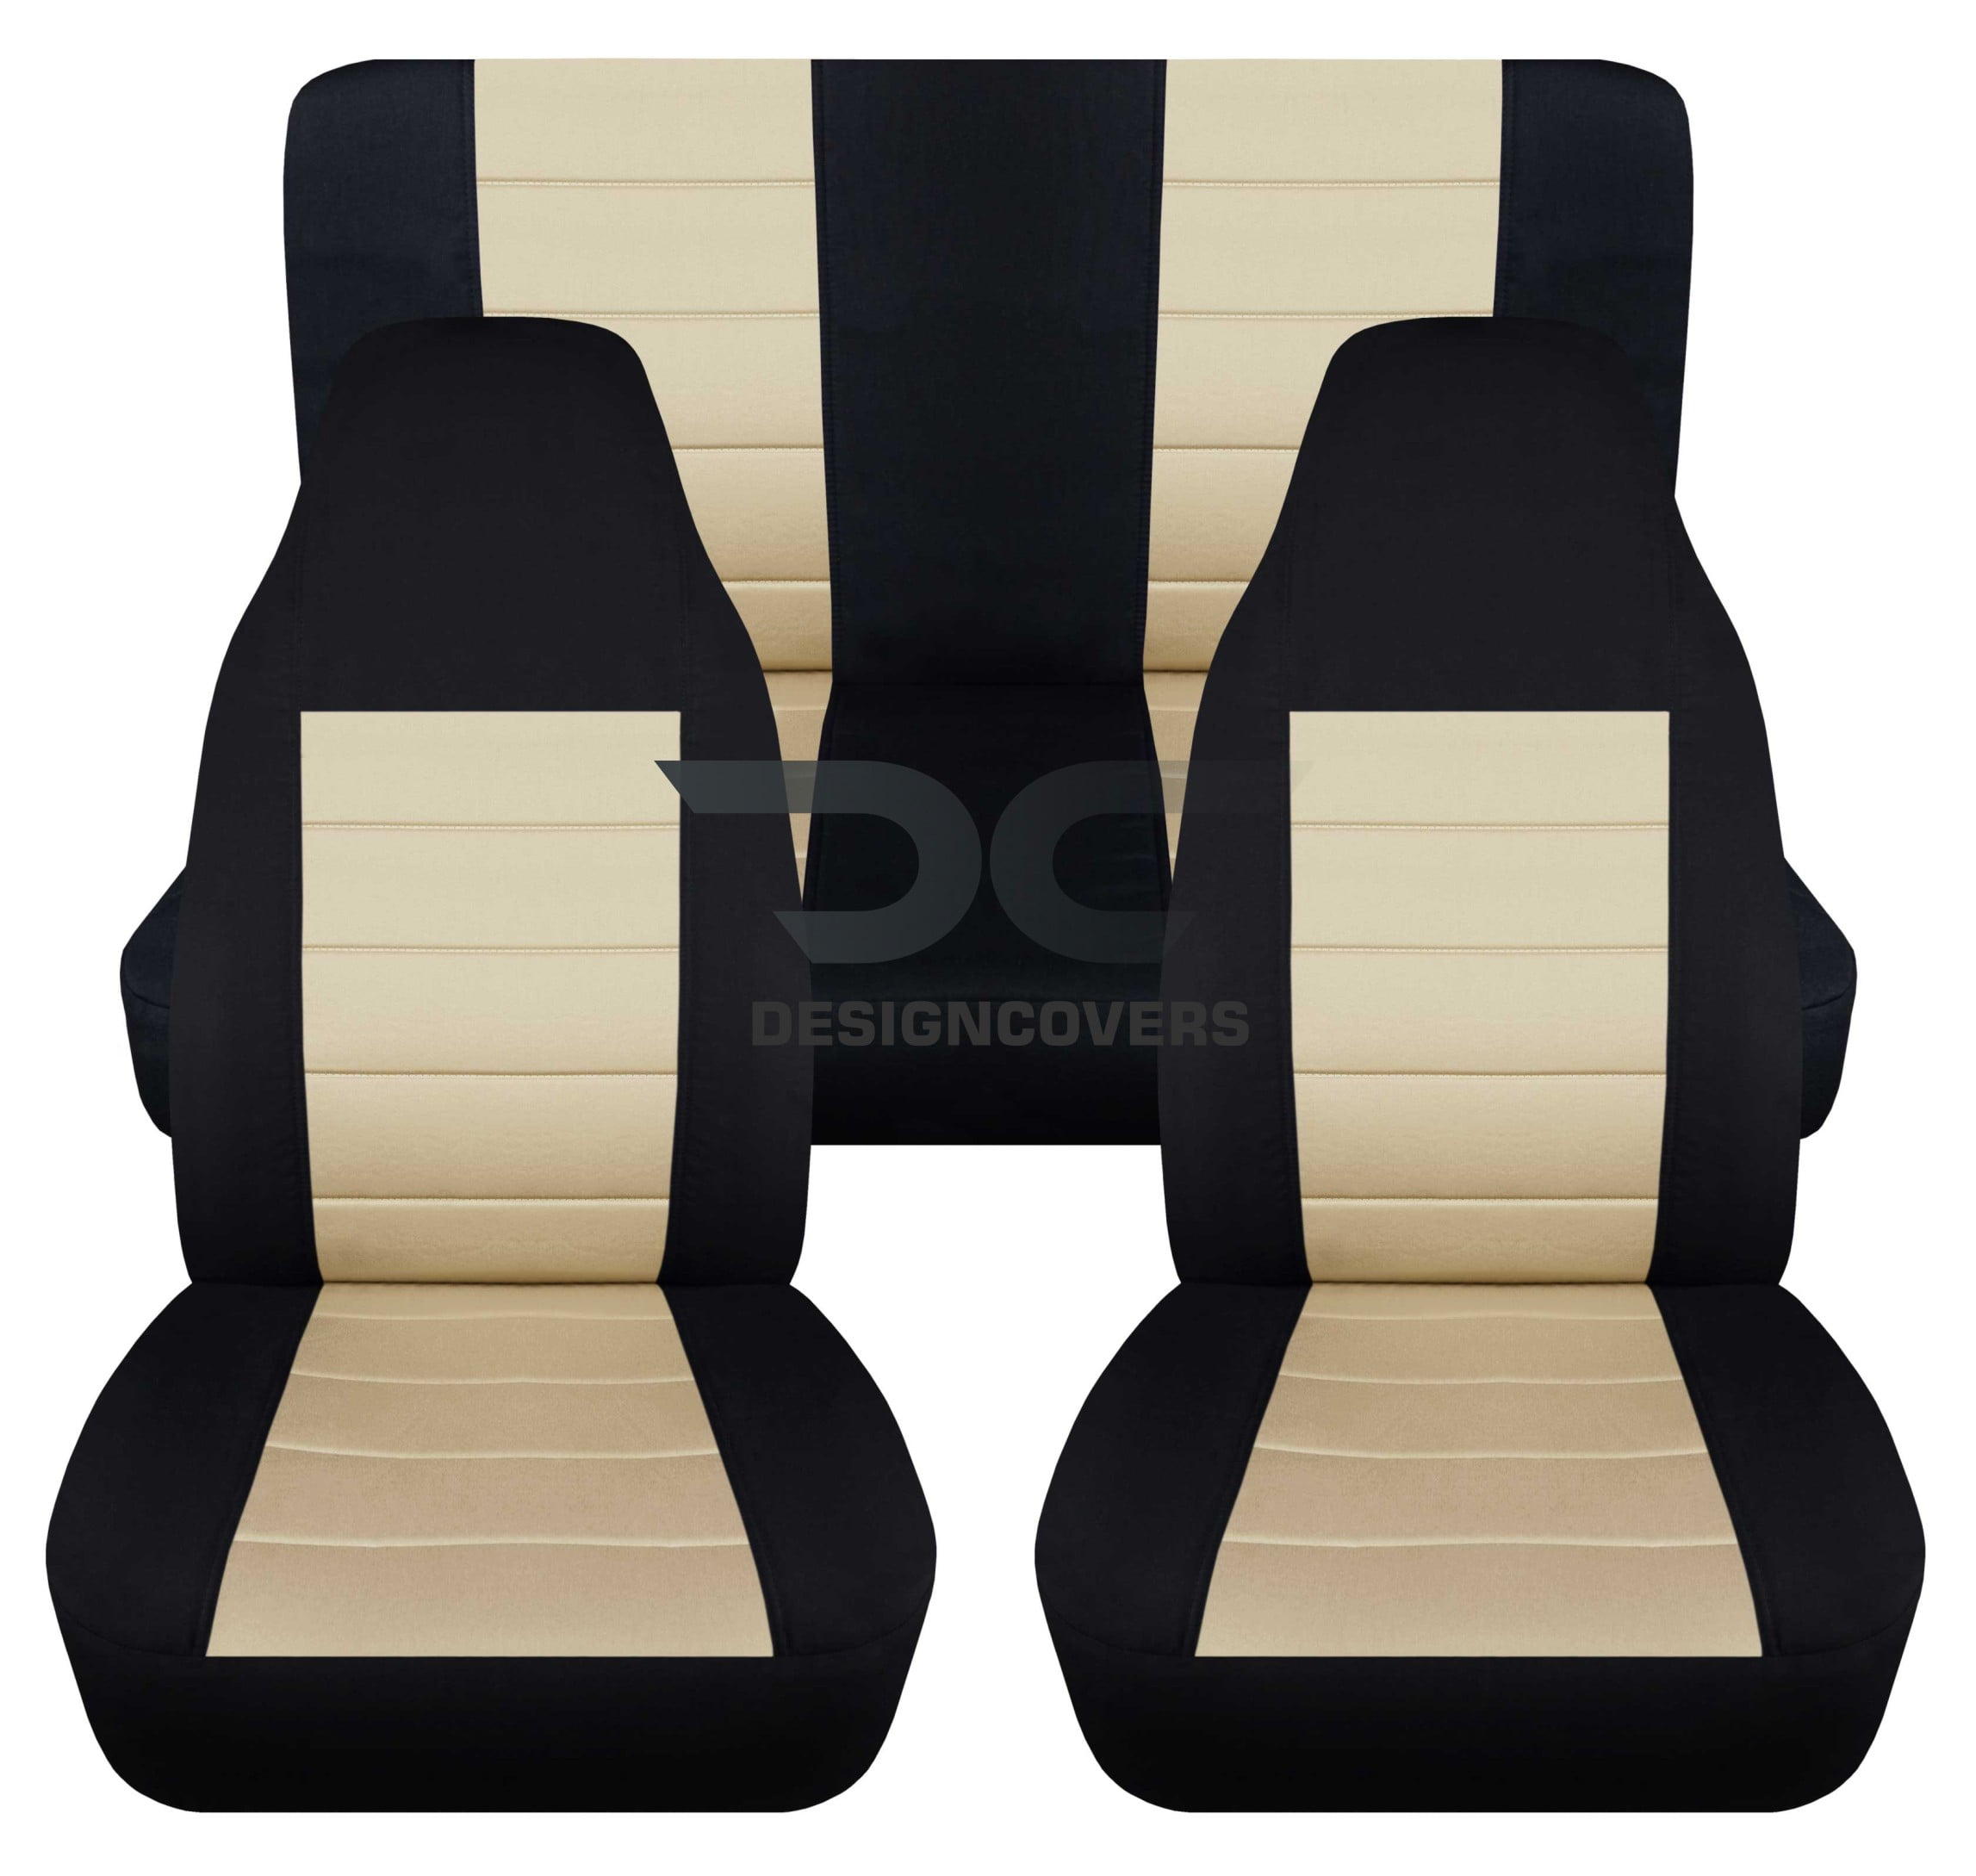 T245-Designcovers Compatible with 1997-2002 Jeep Wrangler TJ 2door Seat  Covers:Black and Sand - Full Set Front&Rear 